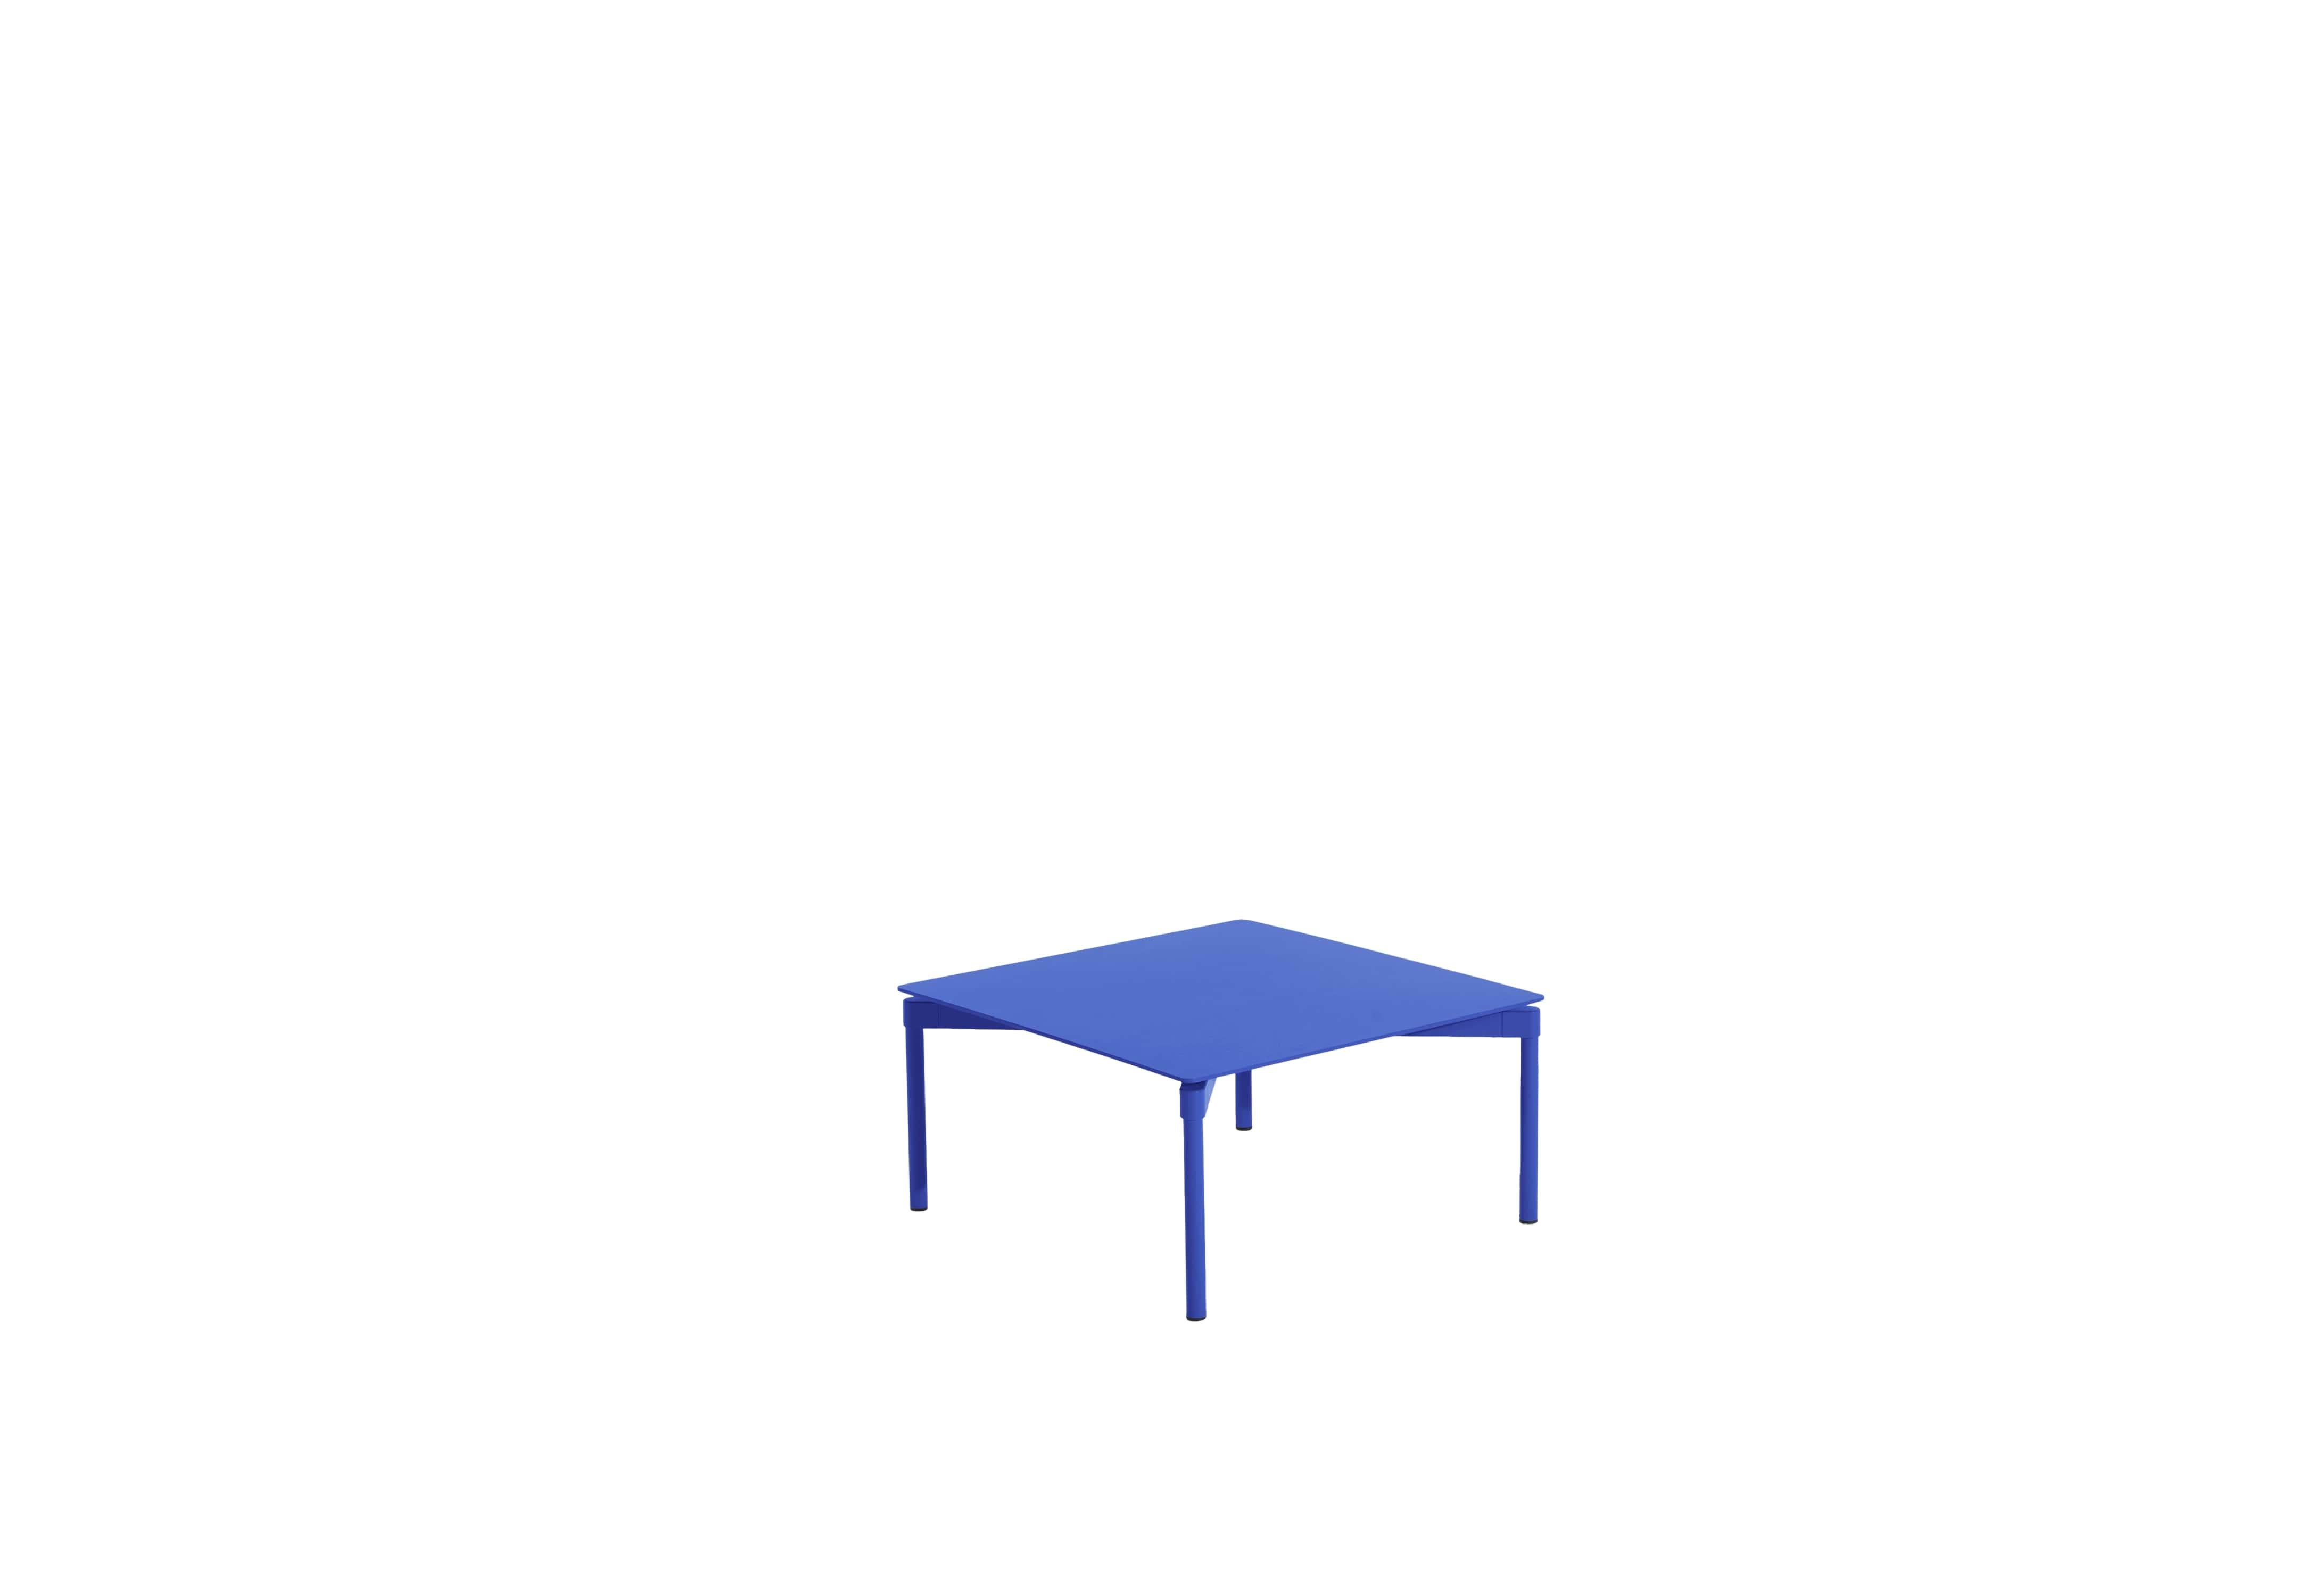 Petite Friture Fromme Coffee Table in Blue Aluminium by Tom Chung, 2020

The Fromme collection stands out by its pure line and compact design. Absorbers placed under the seating gives a soft and very comfortable flexibility to seats. Made from